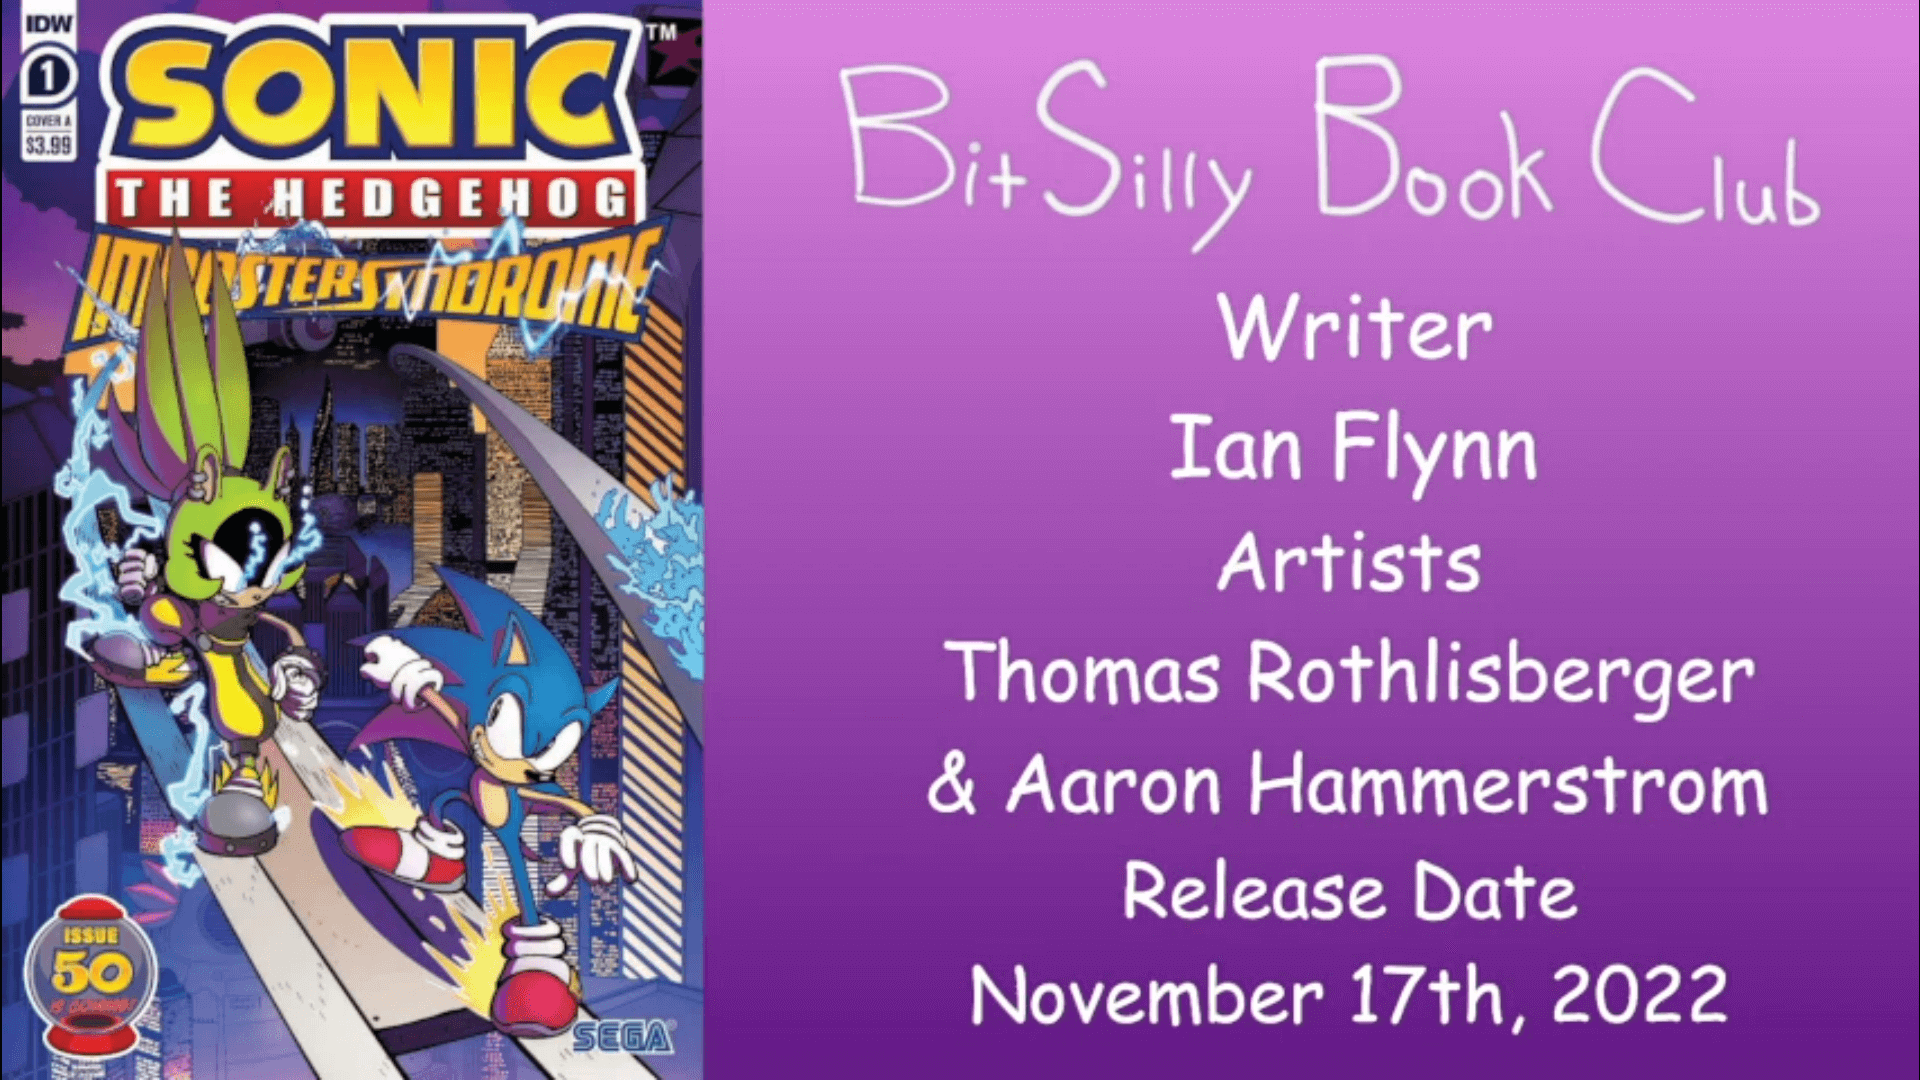 Thumbnail for the stream VOD of Bit Silly Book Club’s review of issues 1 and 2 of the IDW Sonic Imposter Syndrome miniseries. It features the cover for issue 1, the Bit Silly Book Club logo, the release date, and the credits as featured in the comics.